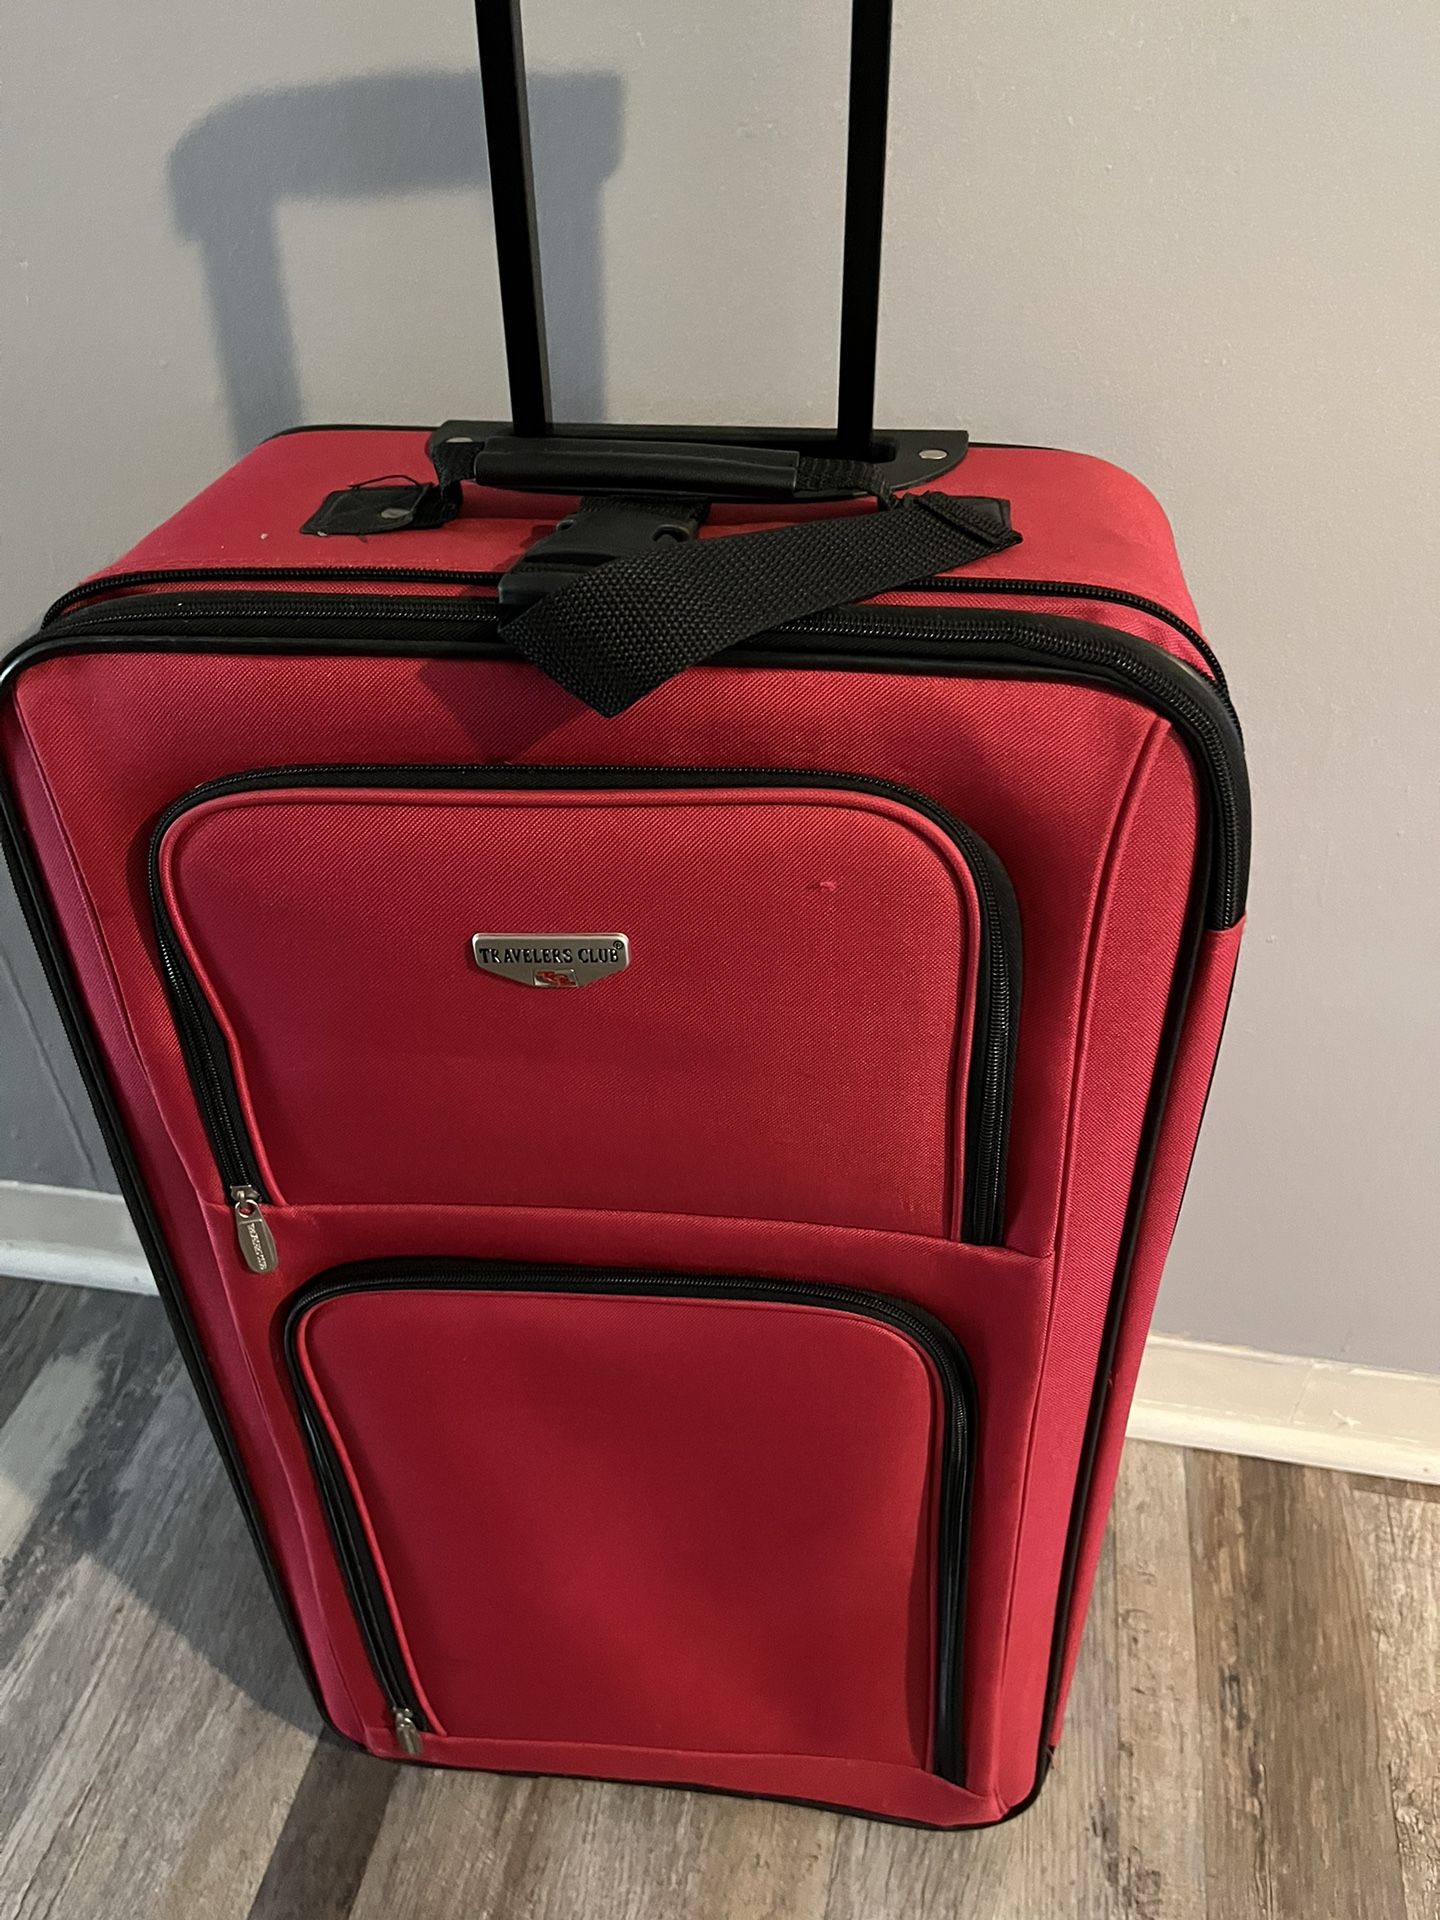 28” Red Pulley Suitcase / /30.00